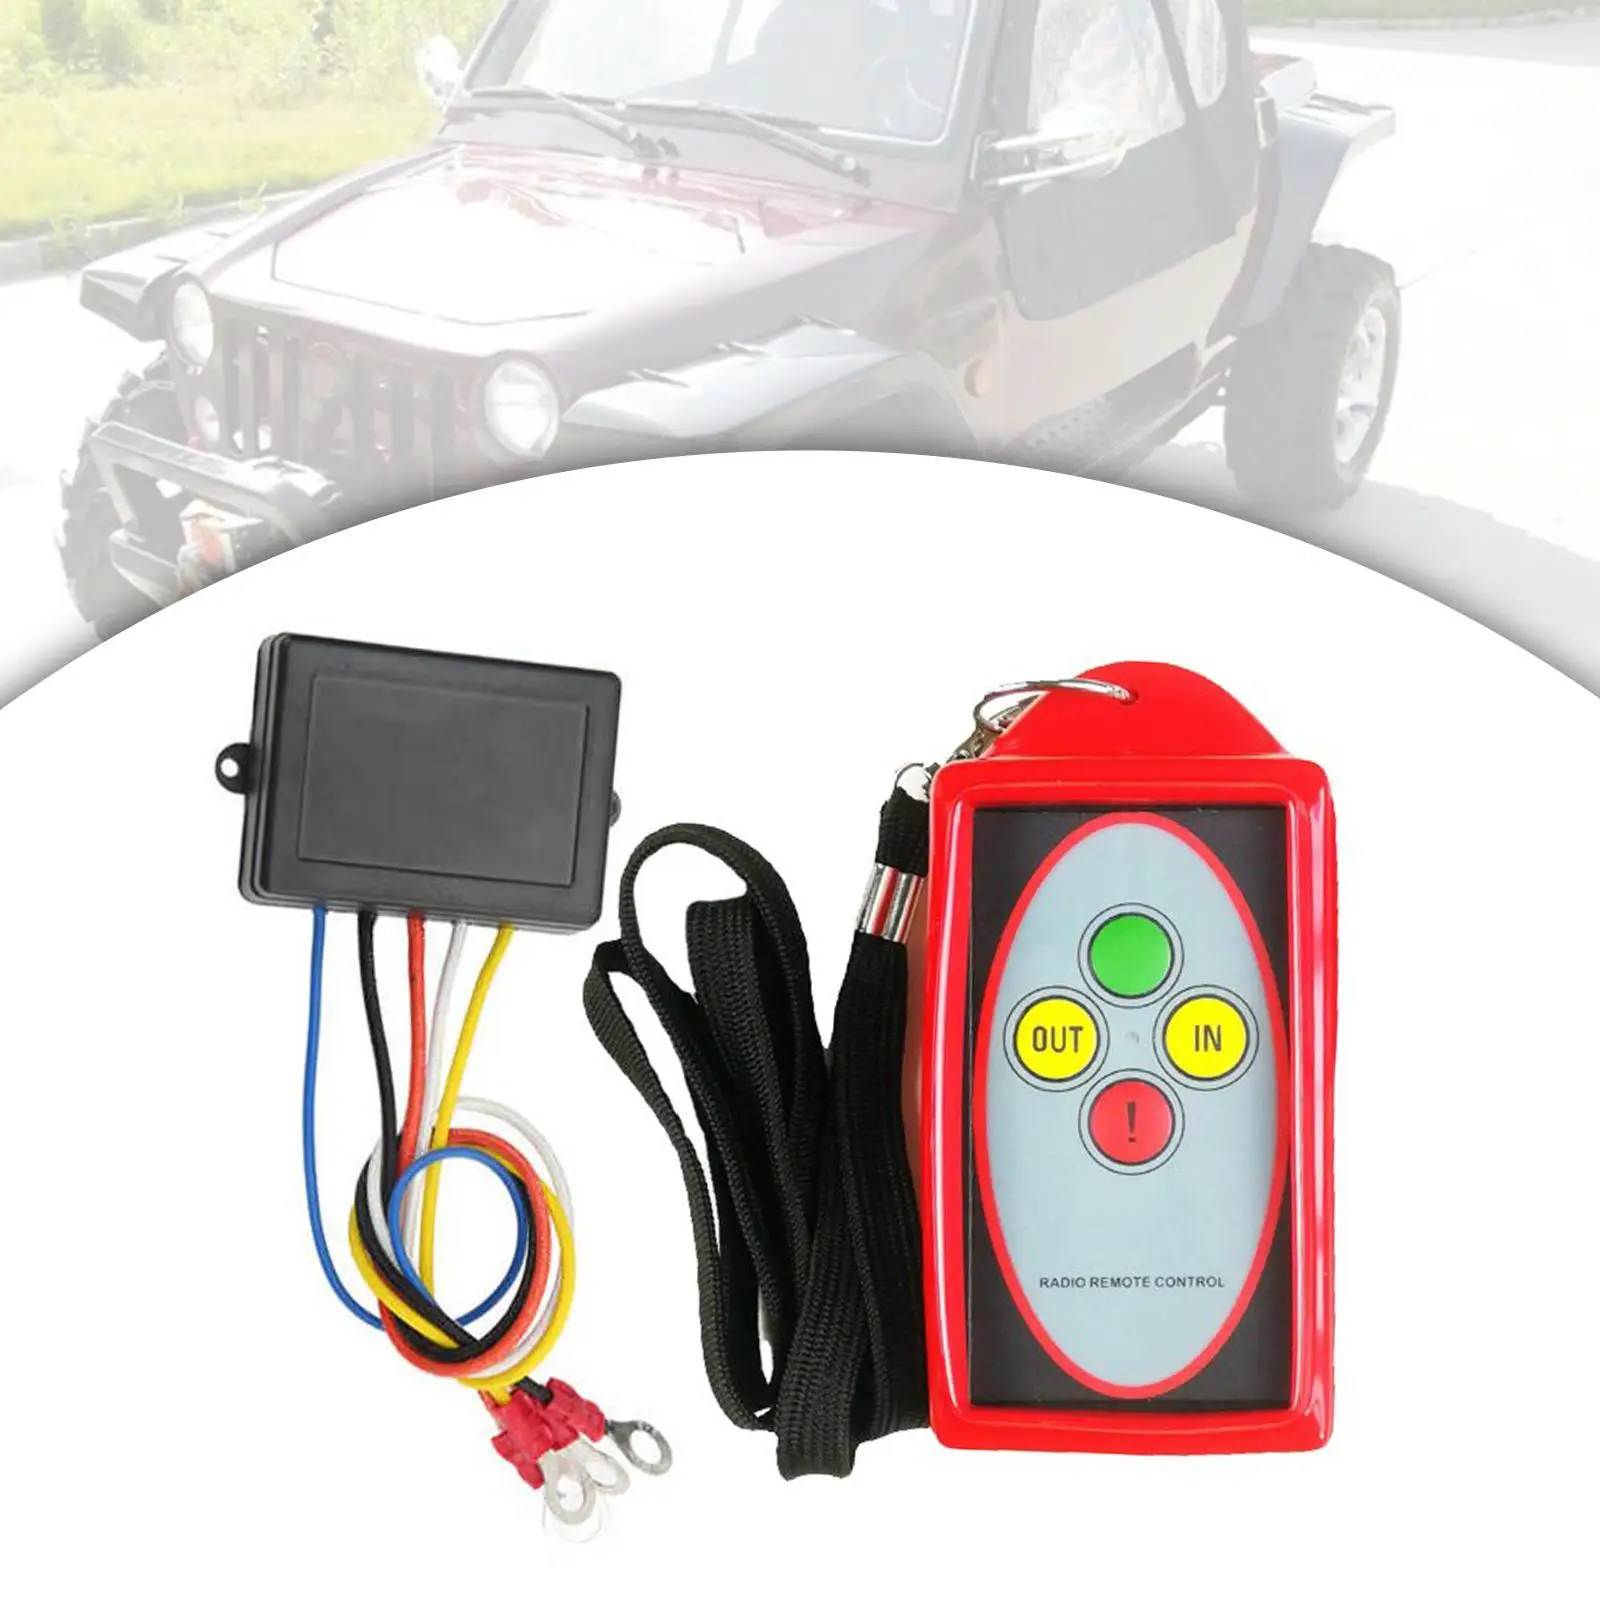 Wireless Winch Remote Control Kit Spare Parts for Truck Car Vehicle